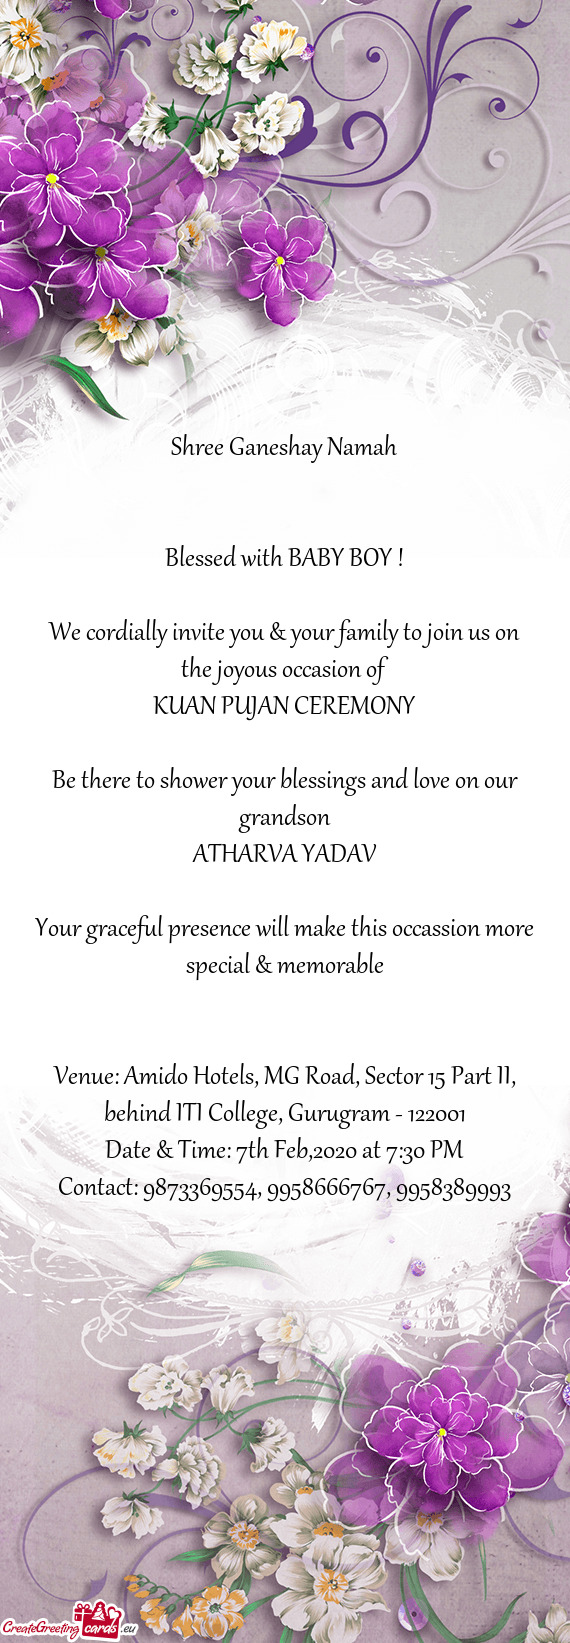 Be there to shower your blessings and love on our grandson